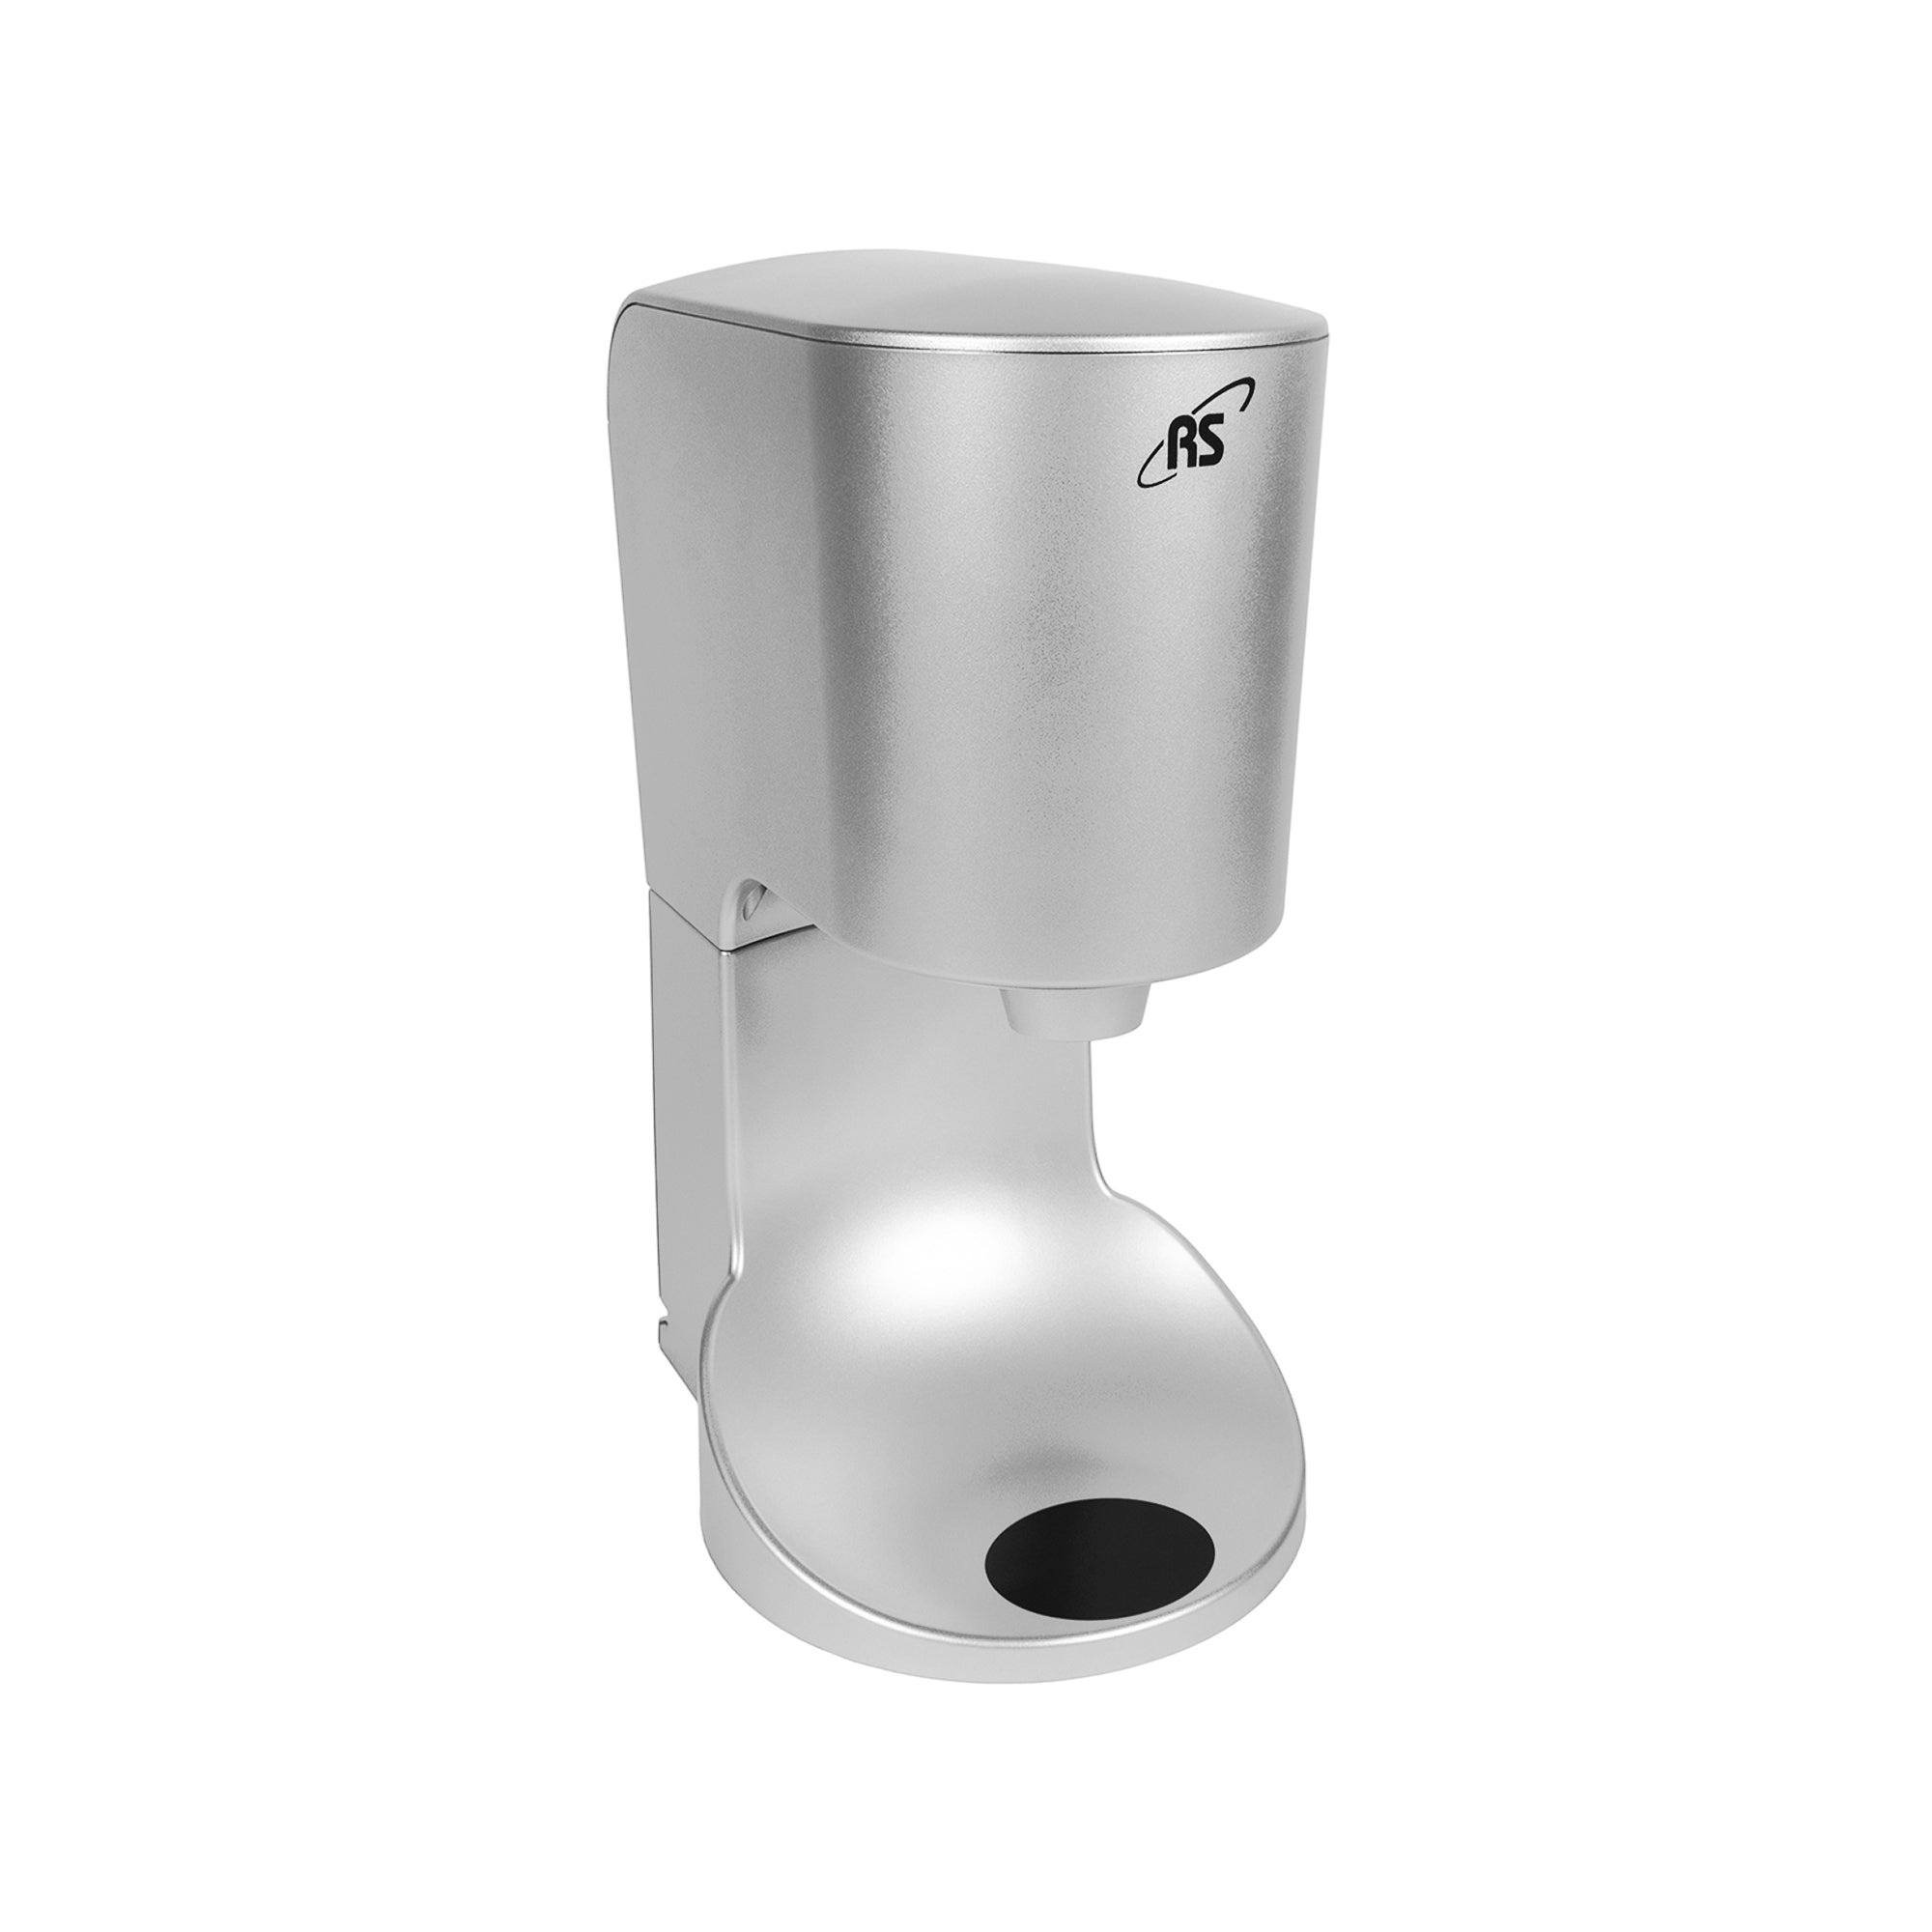 RTHD-790S, Eco-Friendly Touchless Personal Hand Dryer